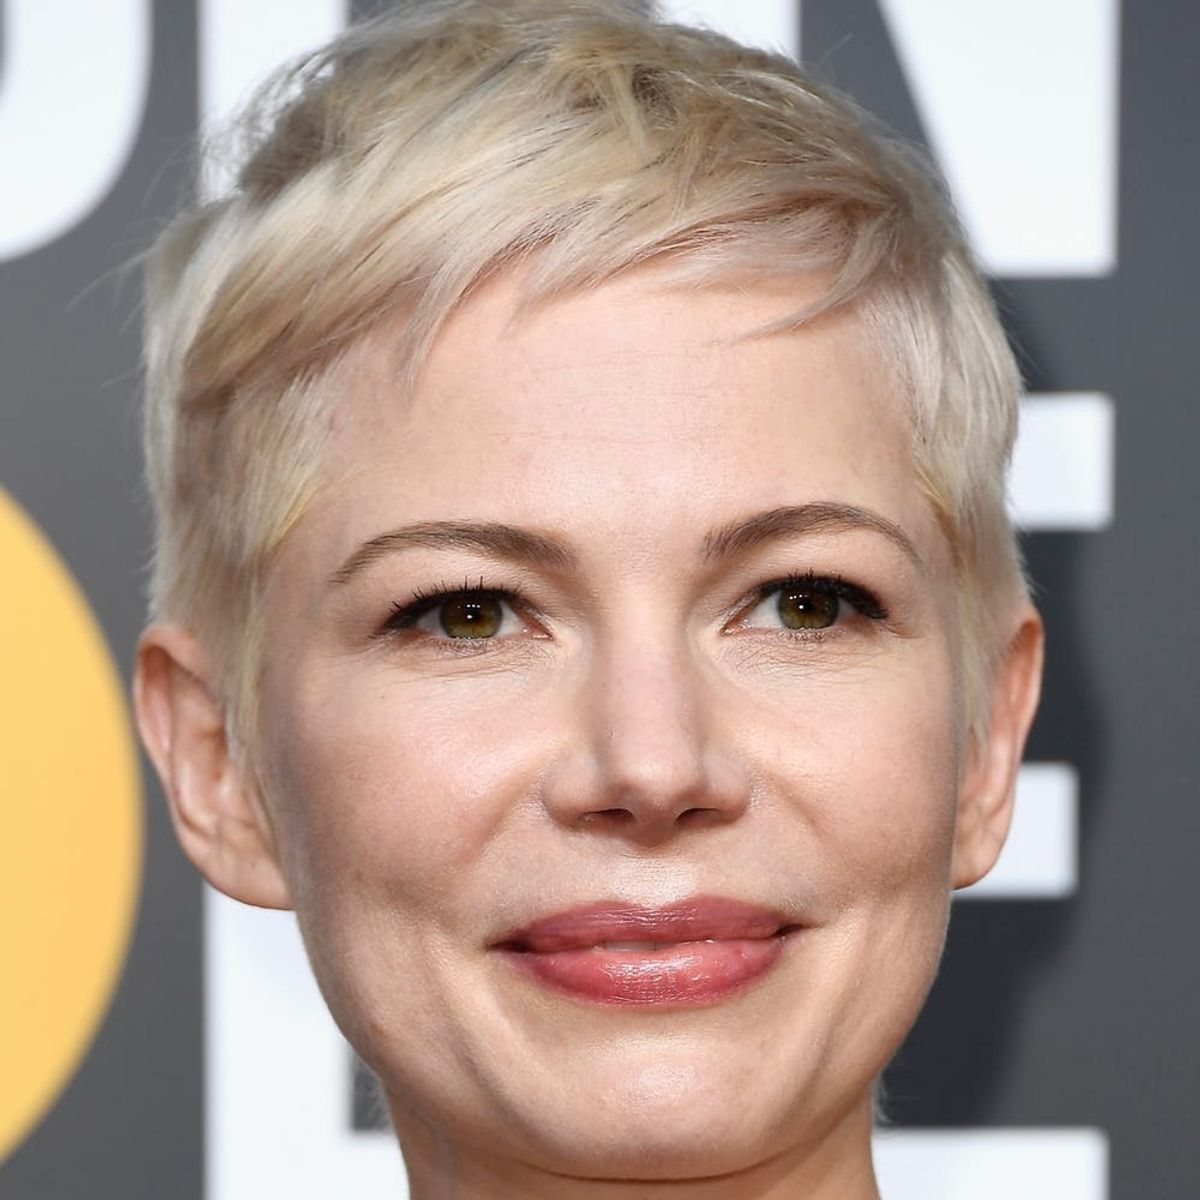 Michelle Williams Has a Shiny New Ring and Engagement Rumors Are Swirling